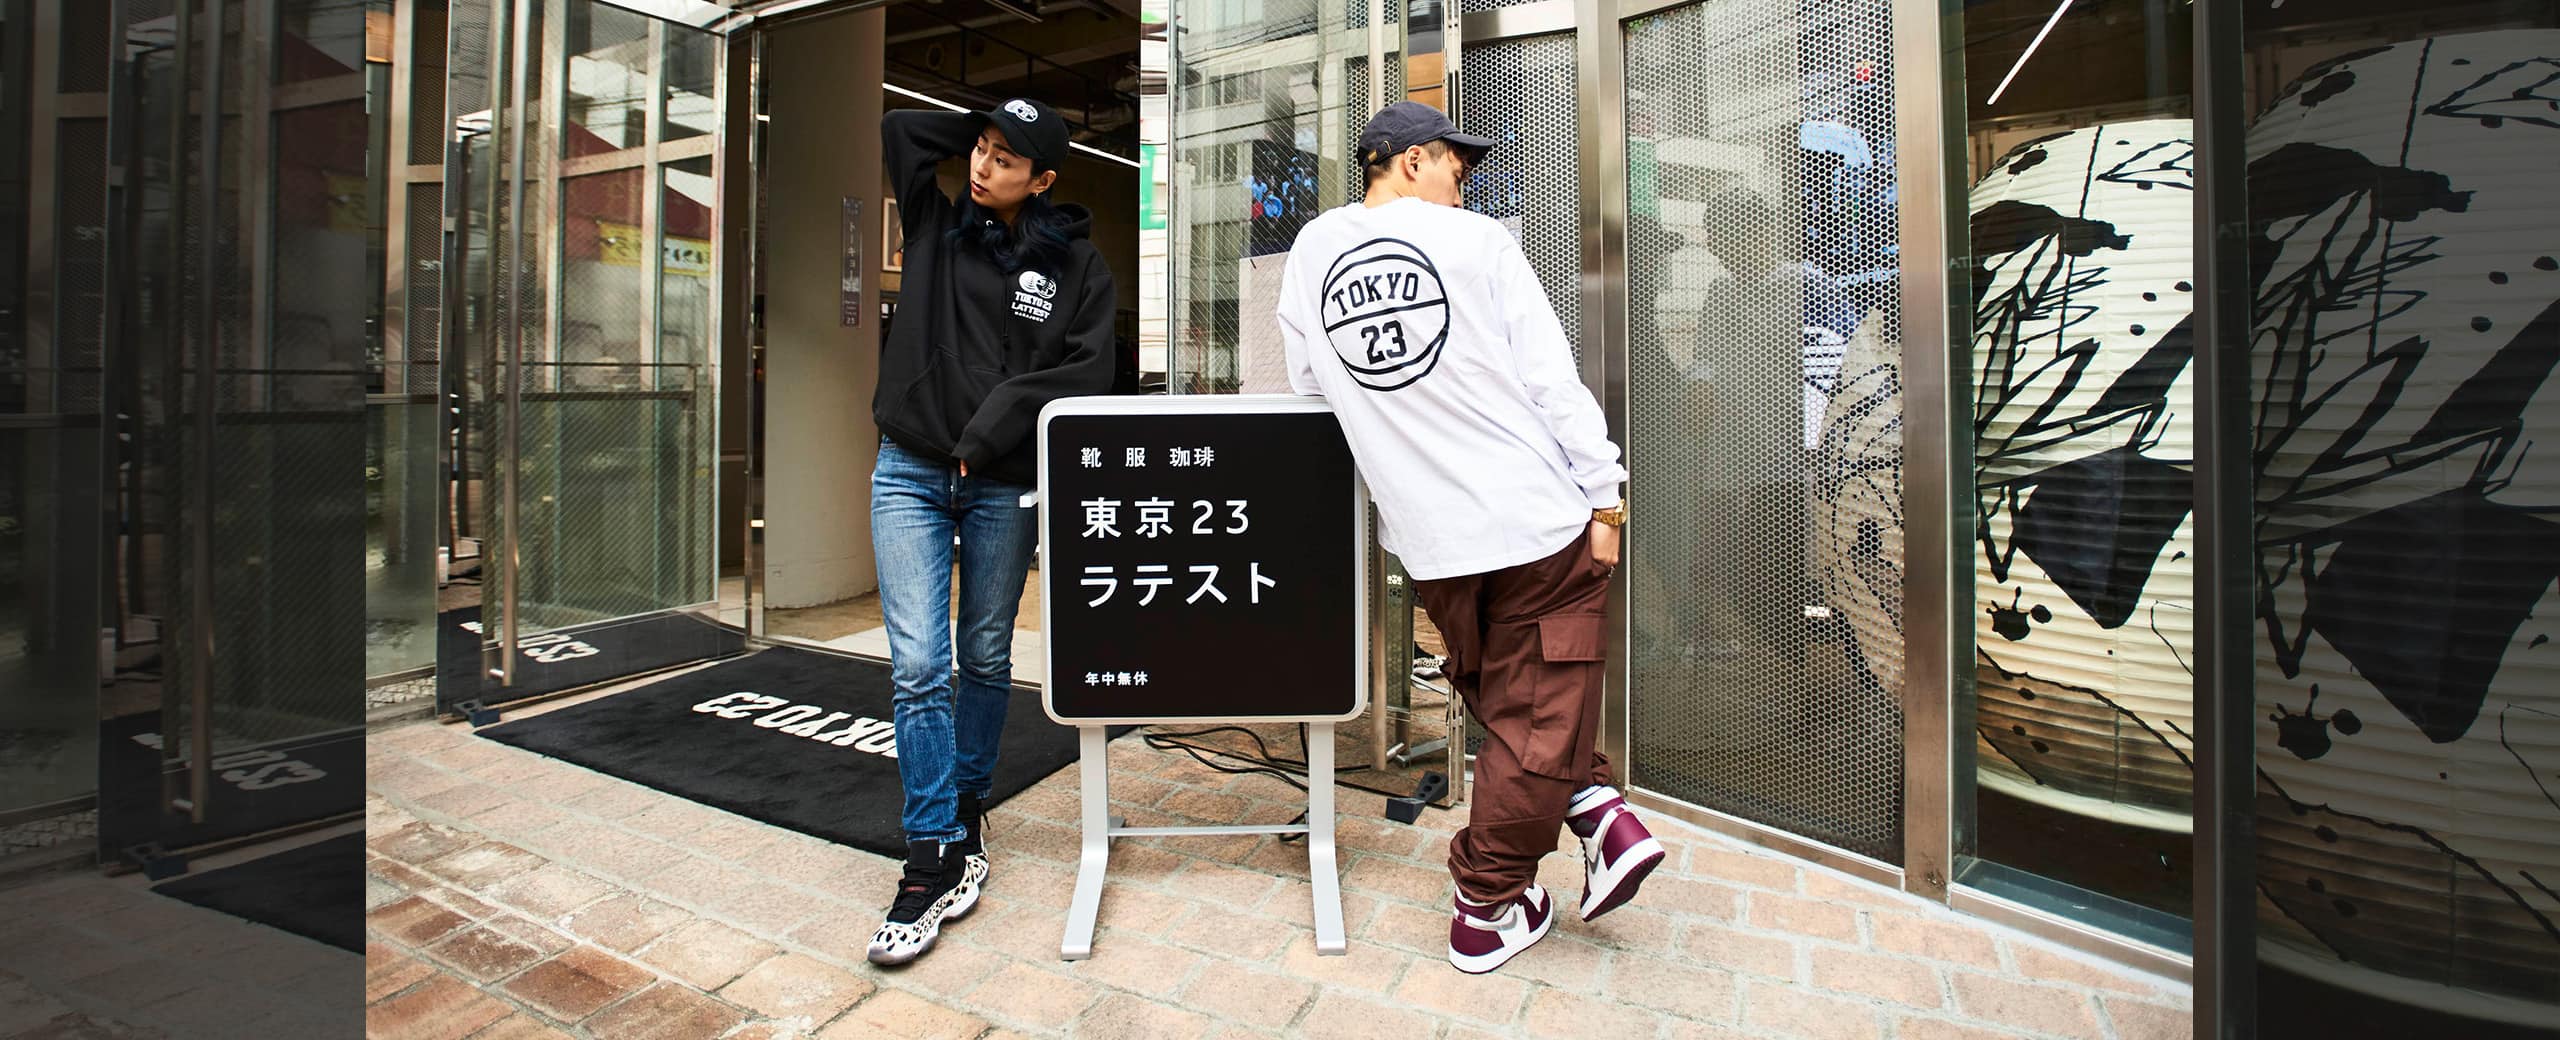 "TOKYO23 LATTEST Capsule Collection"